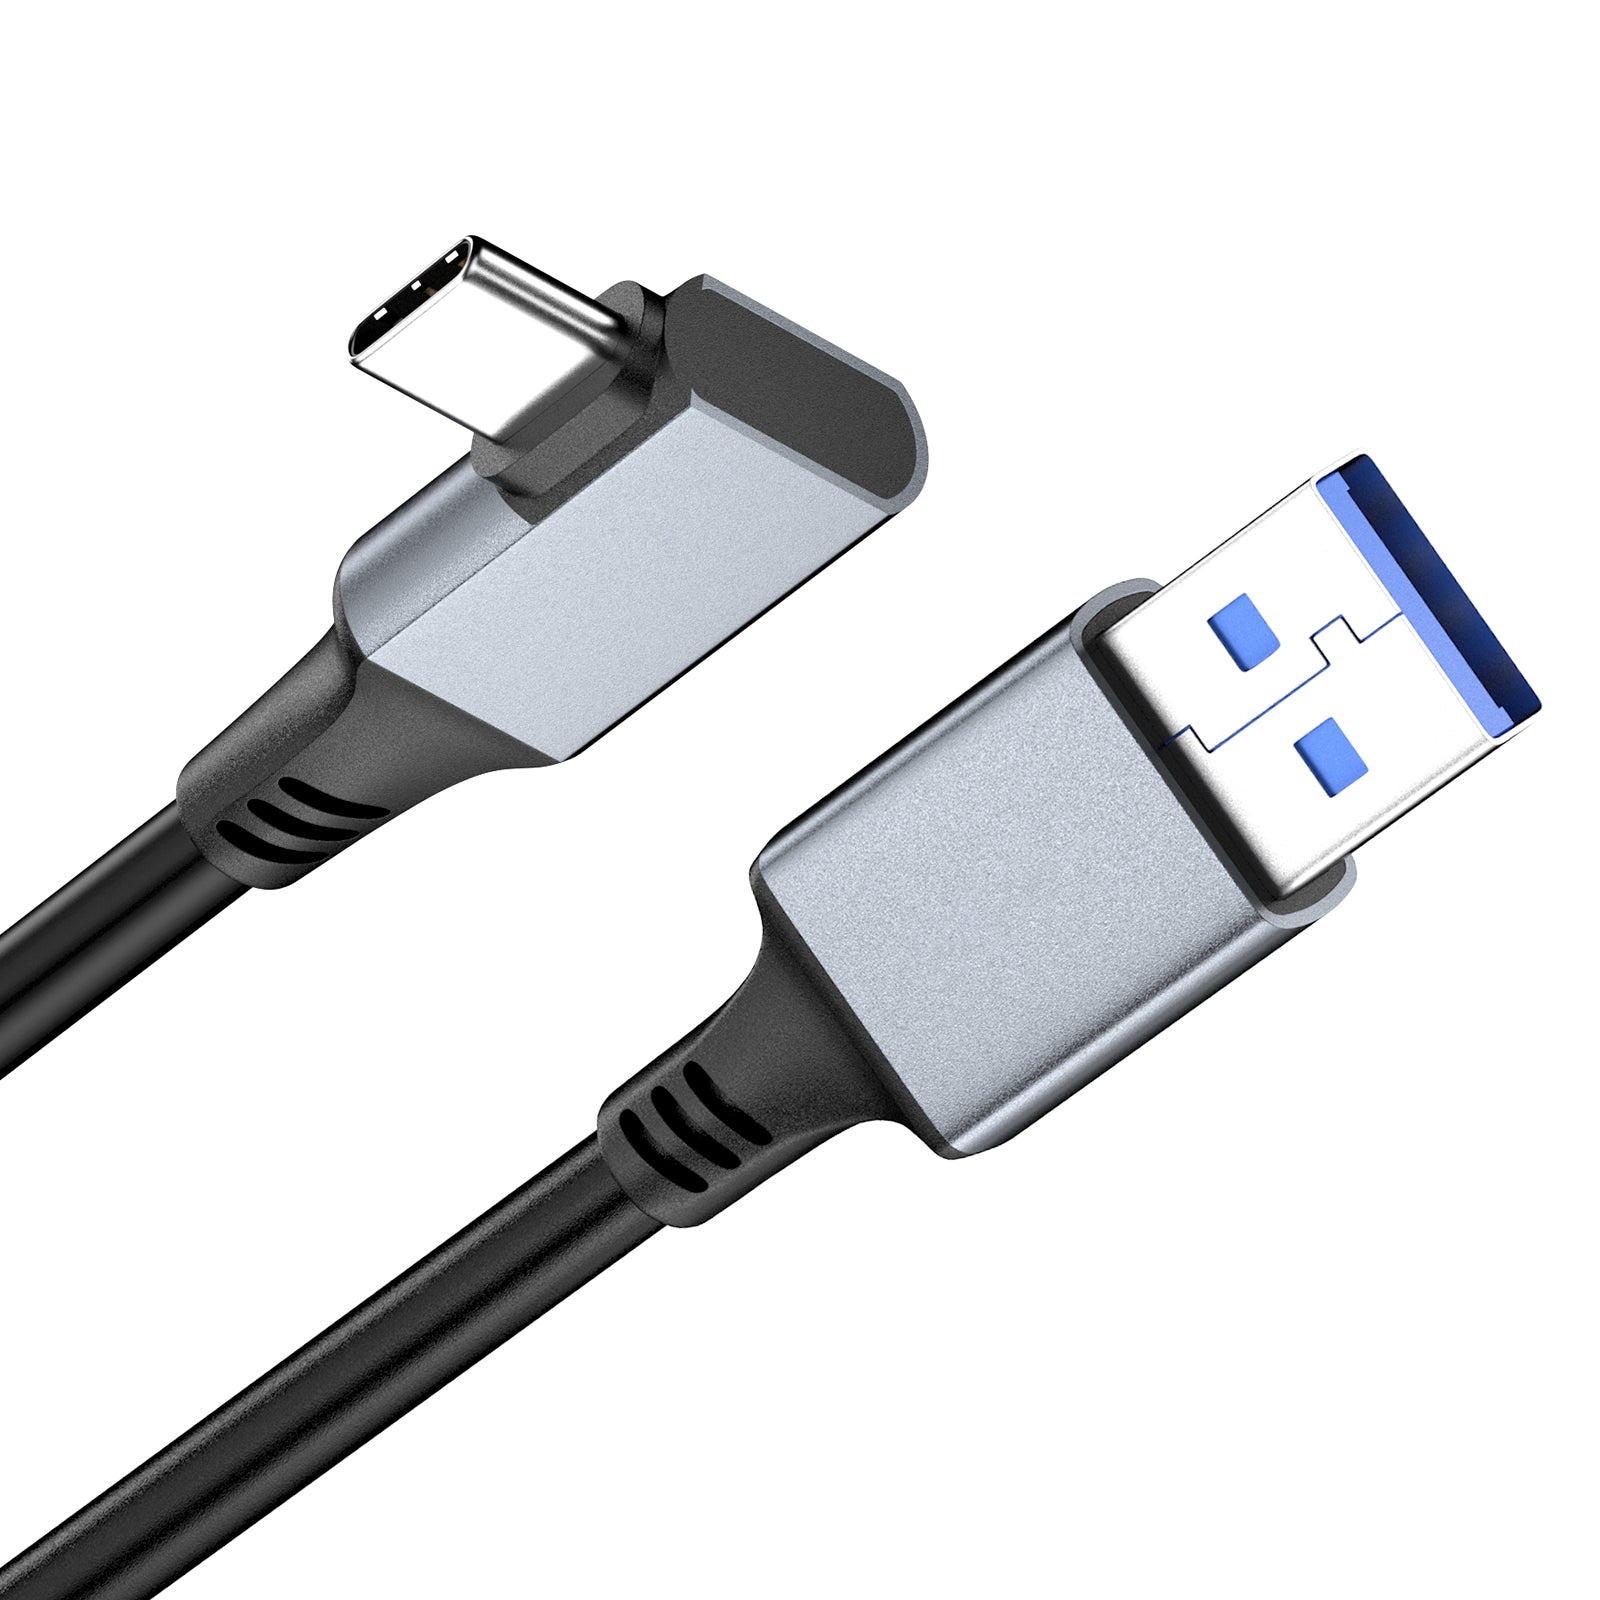 Link Cable 23 FT Compatible with Meta/Oculus Quest 2 Accessories and PC/Steam VR,with Separate Charging Port & High Speed PC Data Transfer,USB 3.0 Type A to C Cable for VR Headset and Gaming PC